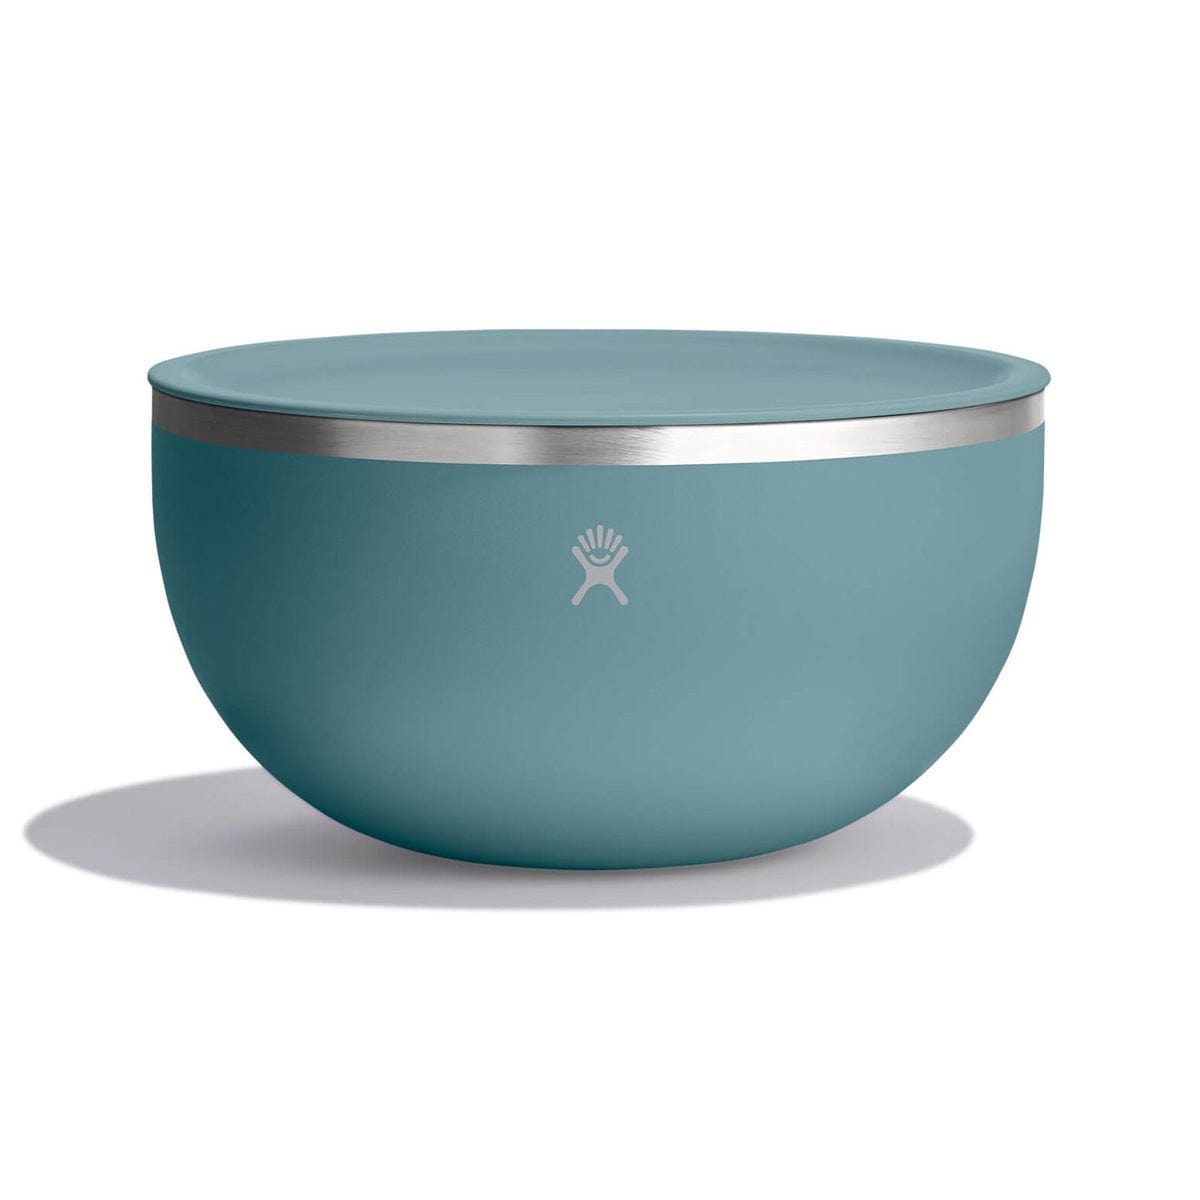 Hydro Flask 3 qt Serving Bowl with Lid – Campmor